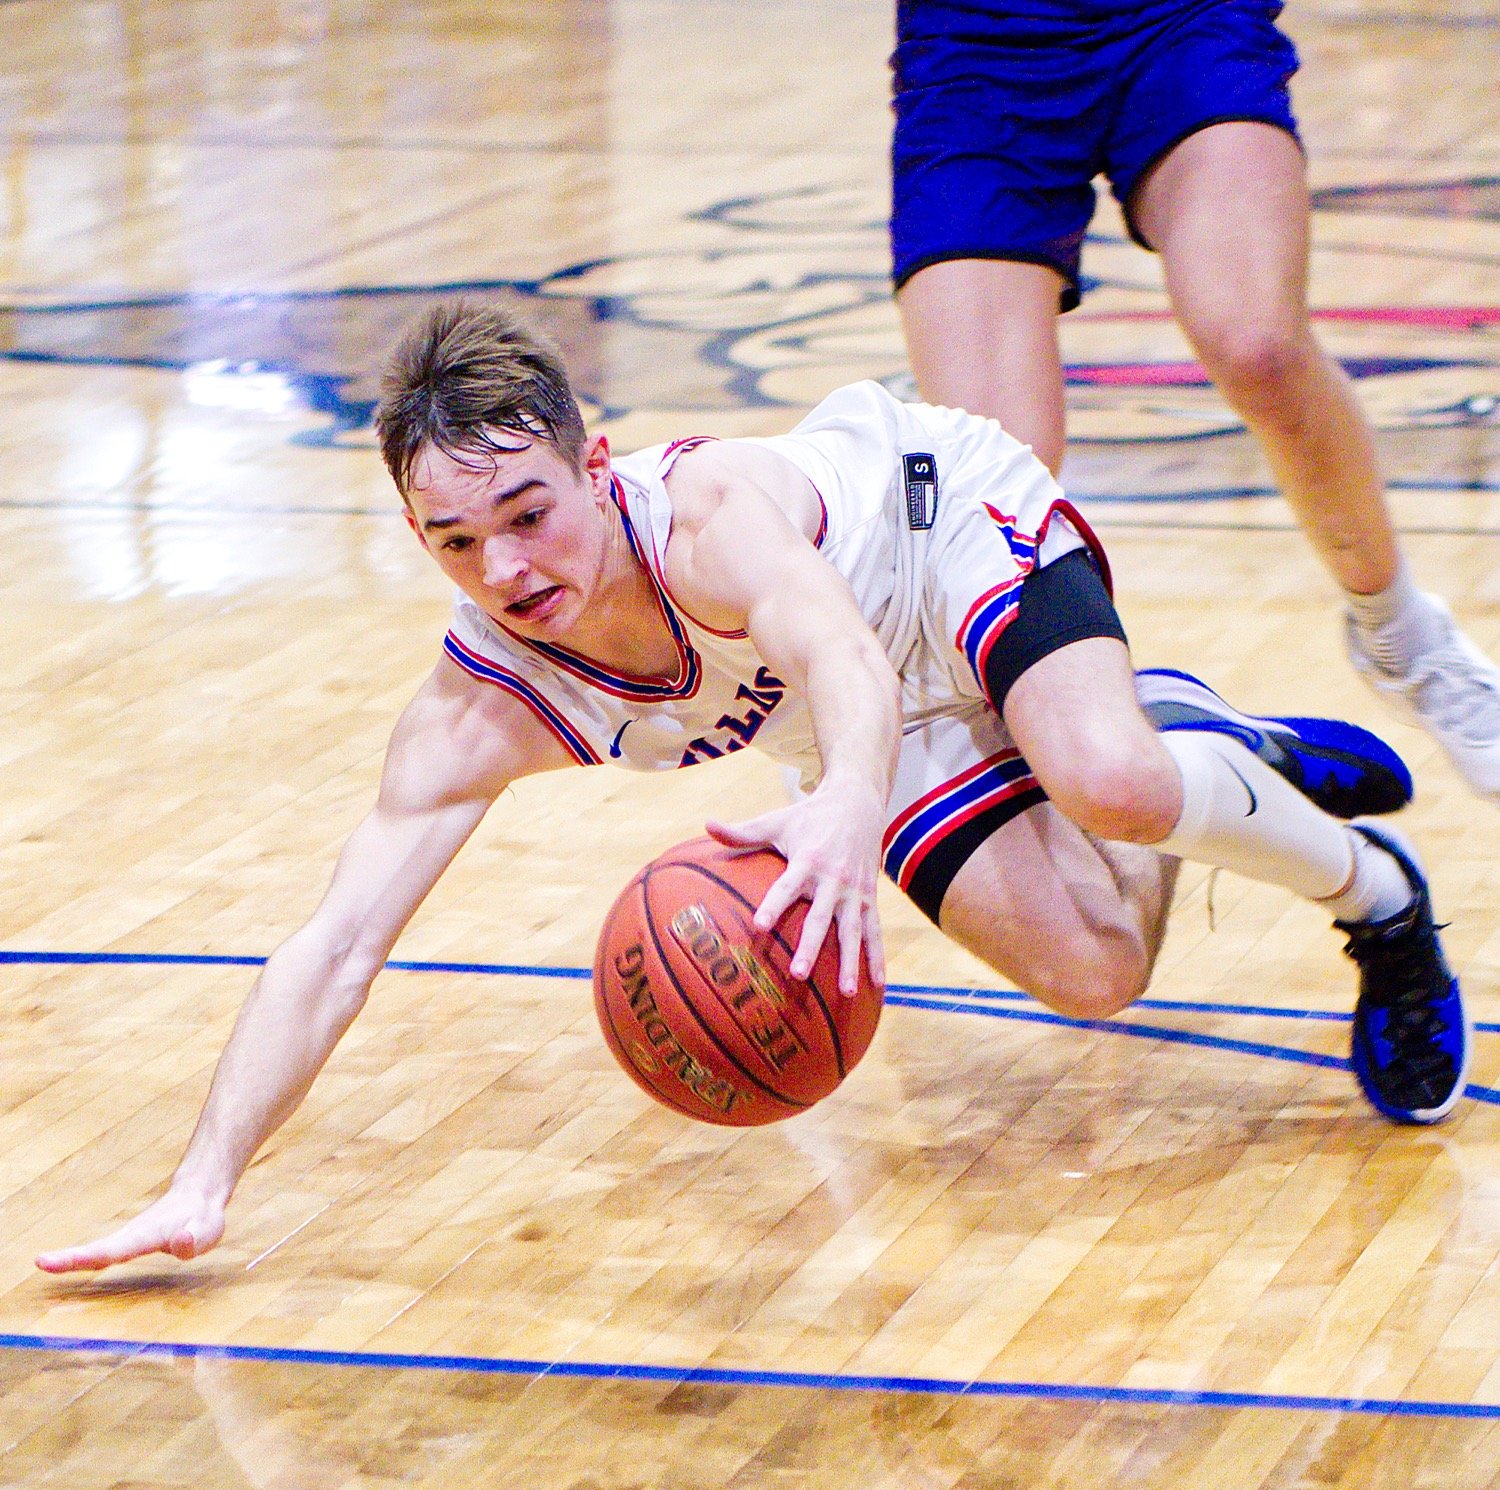 Ford Tannebaum tracks down a loose ball before being fouled and making two crucial free-throws in the final moments of the game. [more hoops highlights here]